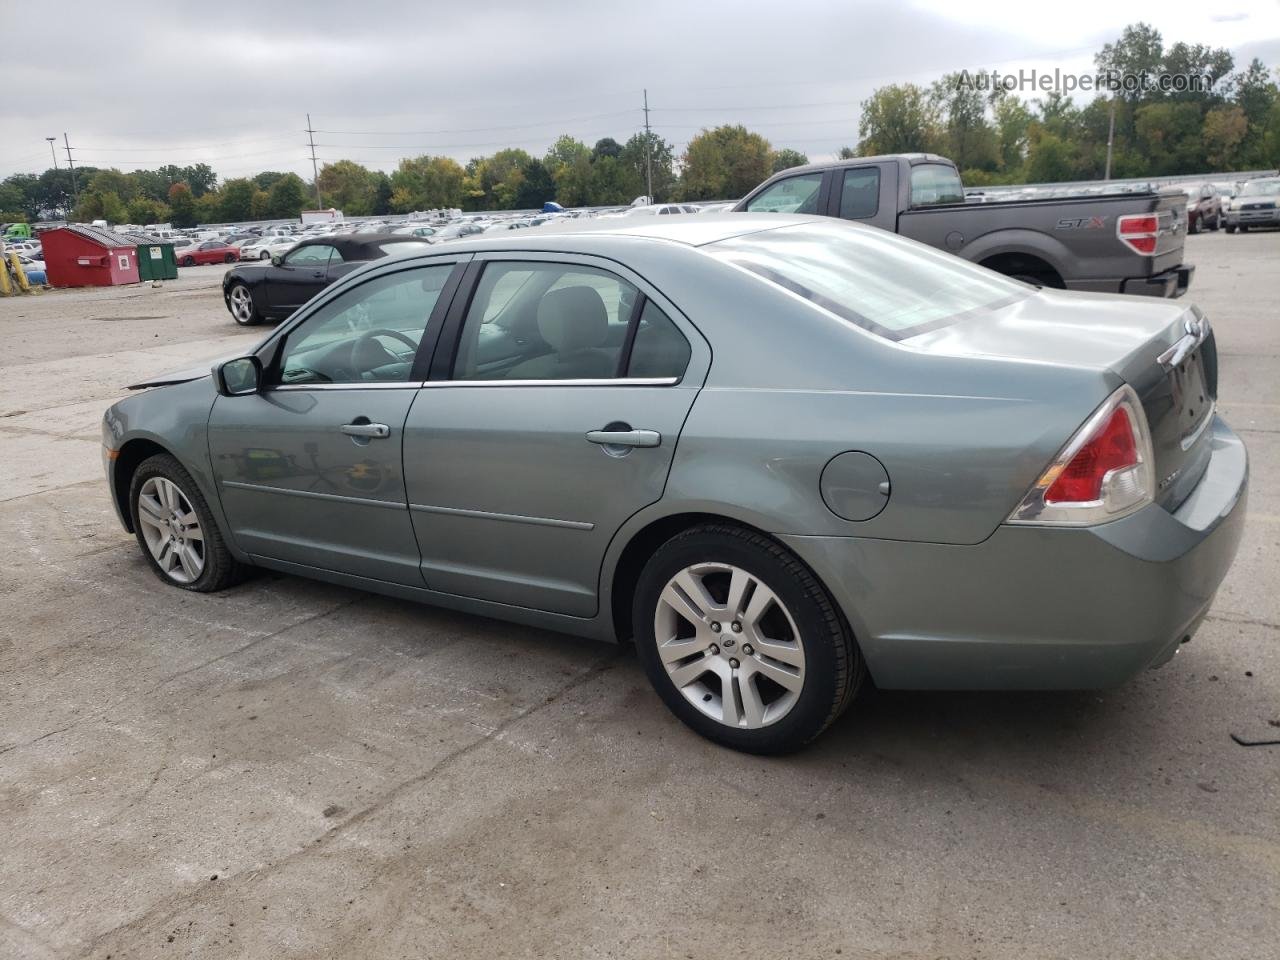 2006 Ford Fusion Sel Turquoise vin: 3FAFP08106R208638